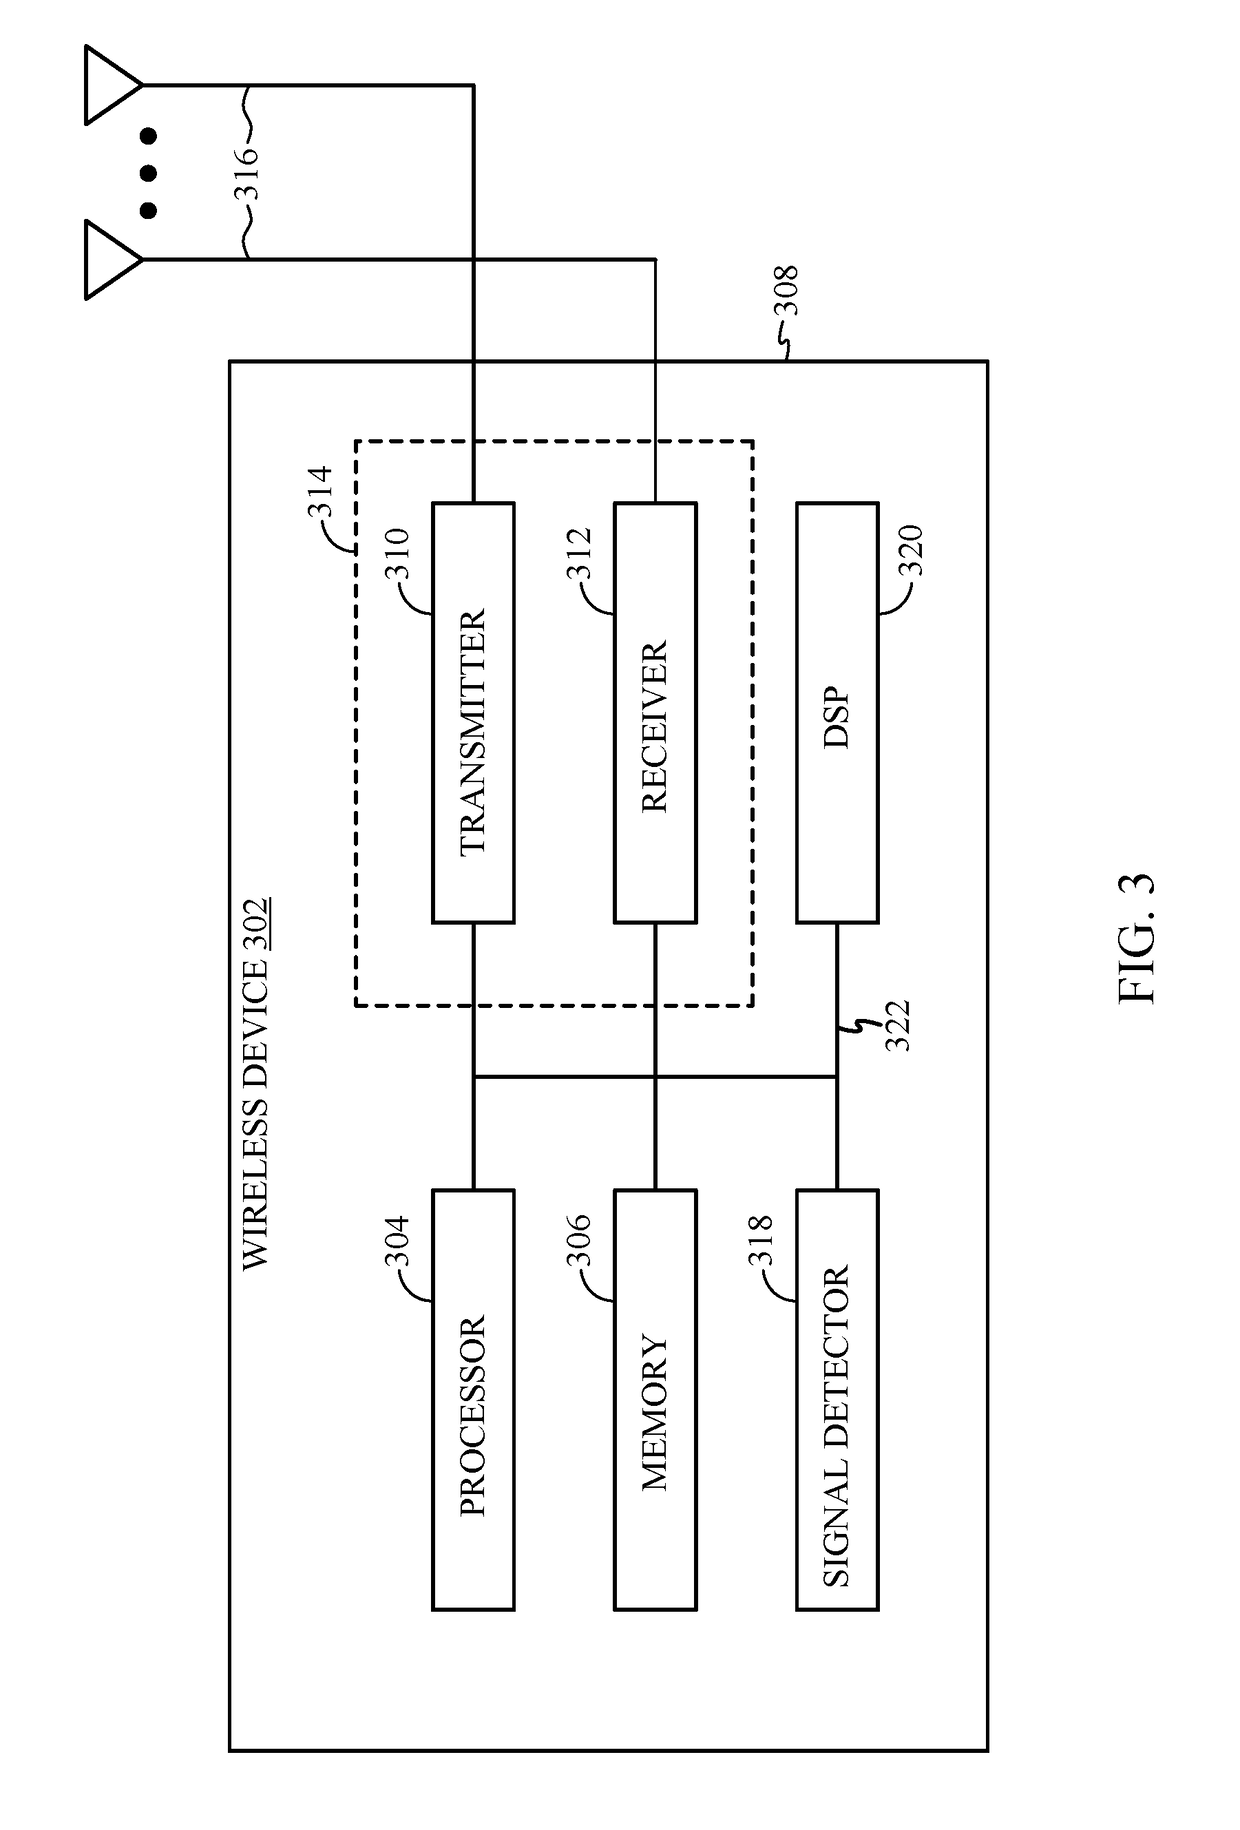 Downlink (DL) coordinated beamforming protocols for WIFI